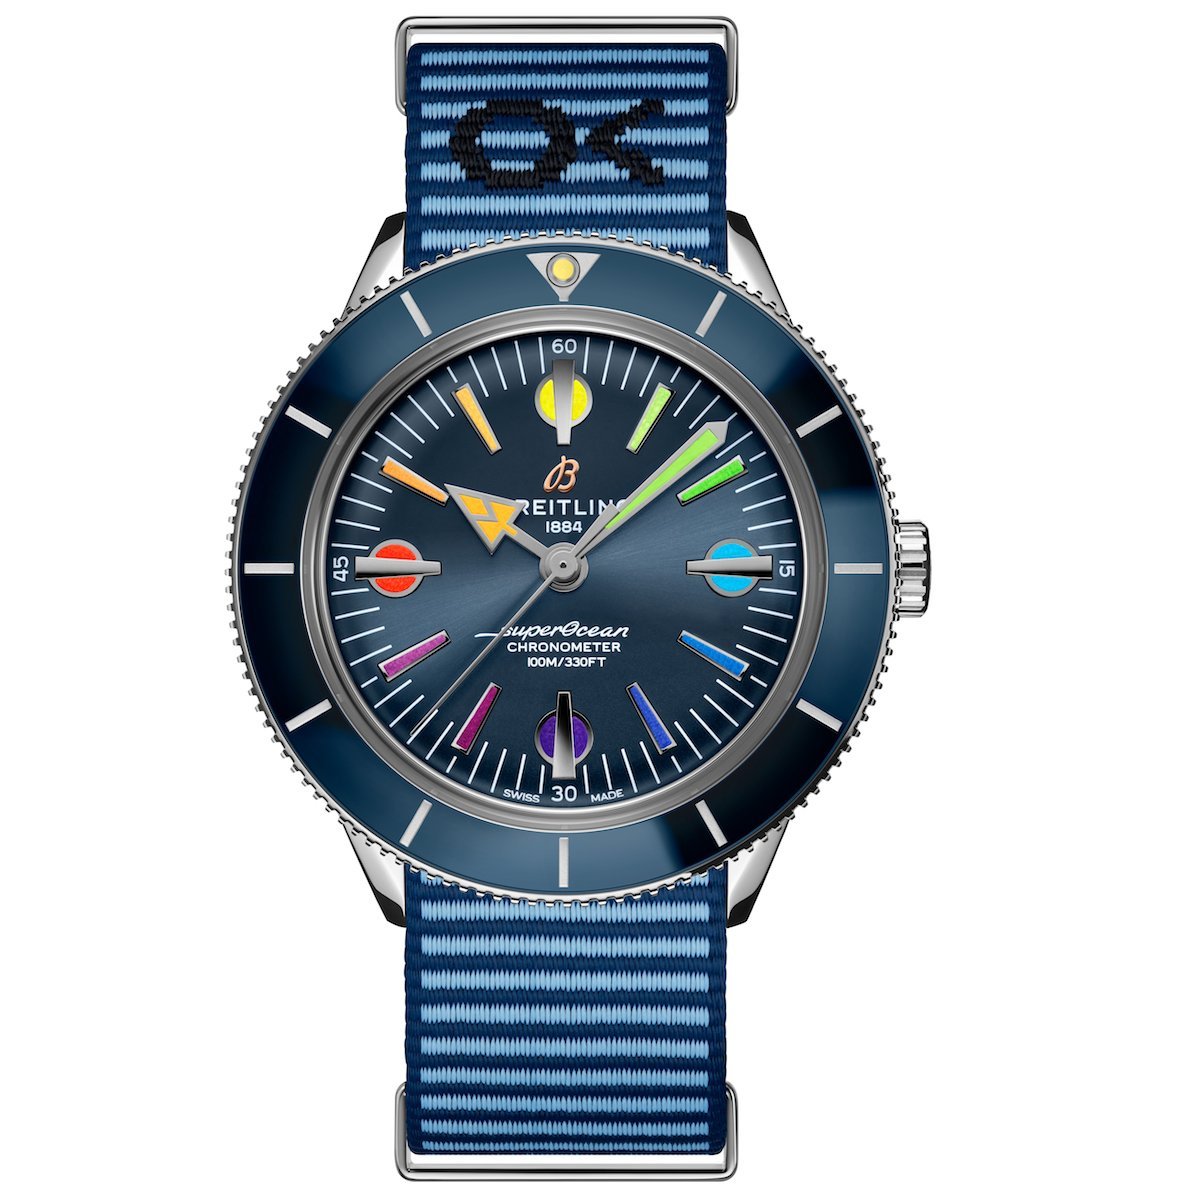 Superocean Heritage '57 Limited Edition II, Breitling